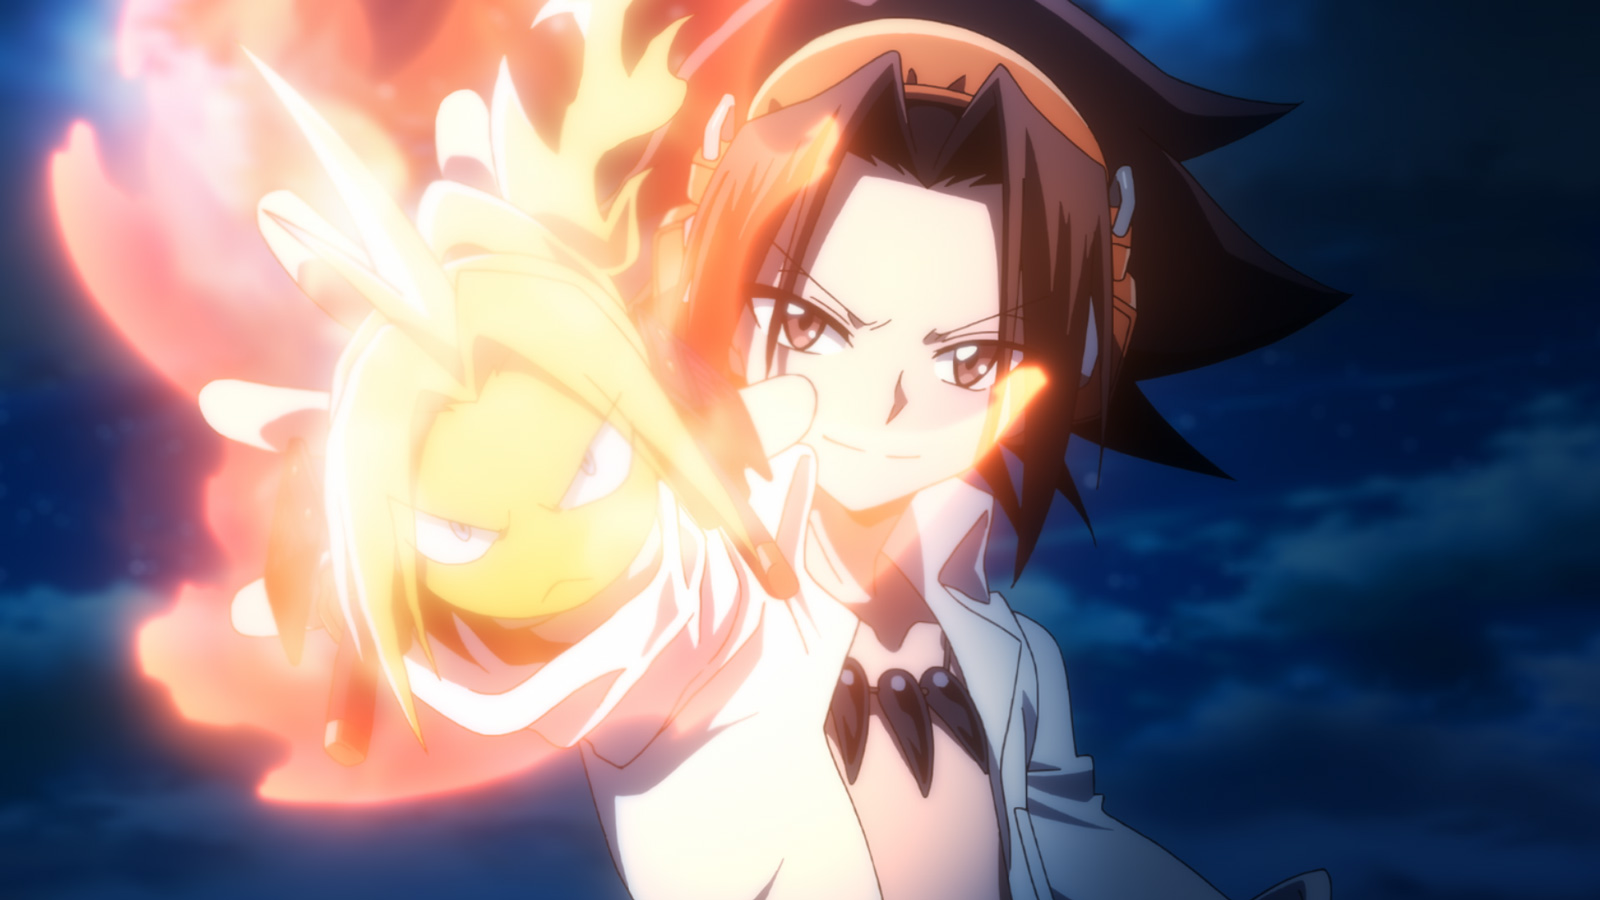 The 2021 Shaman King anime series (stylized as SHAMAN KING) is based on the manga series of the same name written and illustrated by Hiroyuki Takei. A...